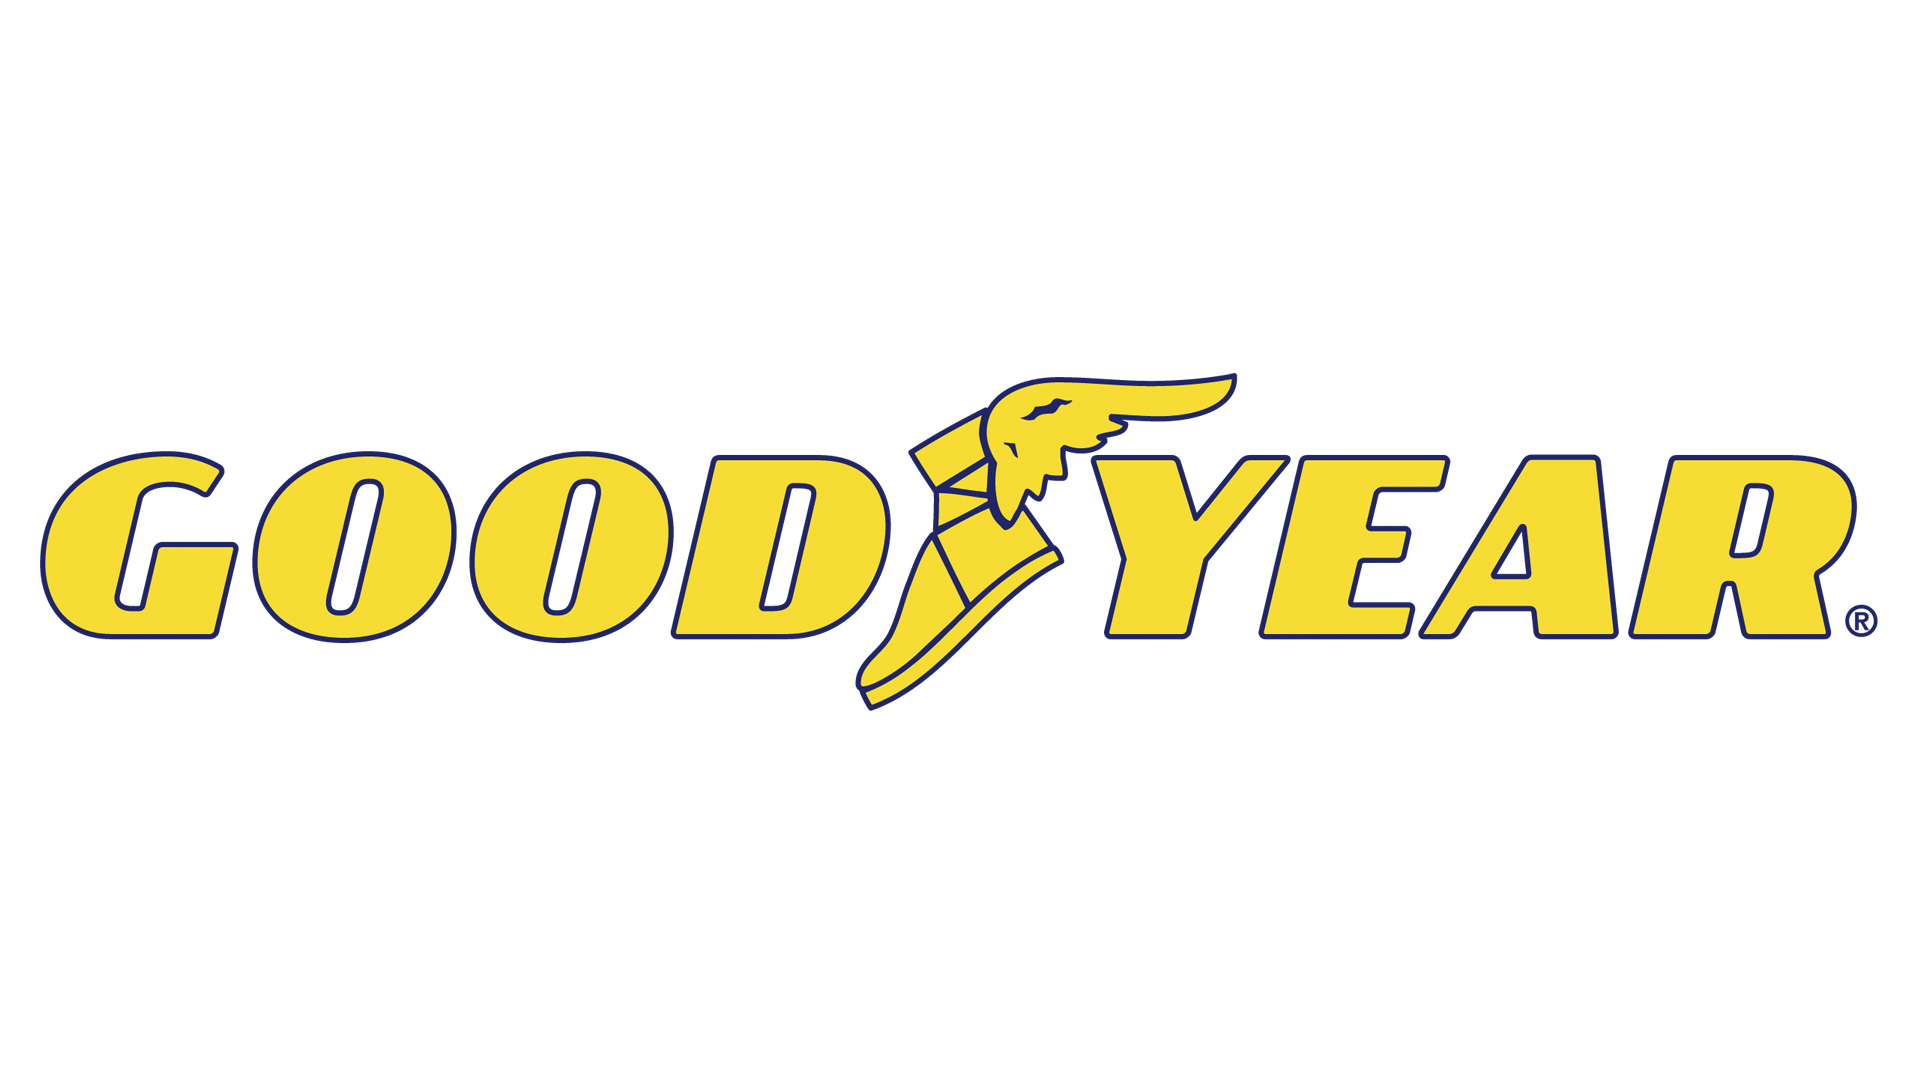 Goodyear Logo - Goodyear Logo, Goodyear Symbol, Meaning, History and Evolution